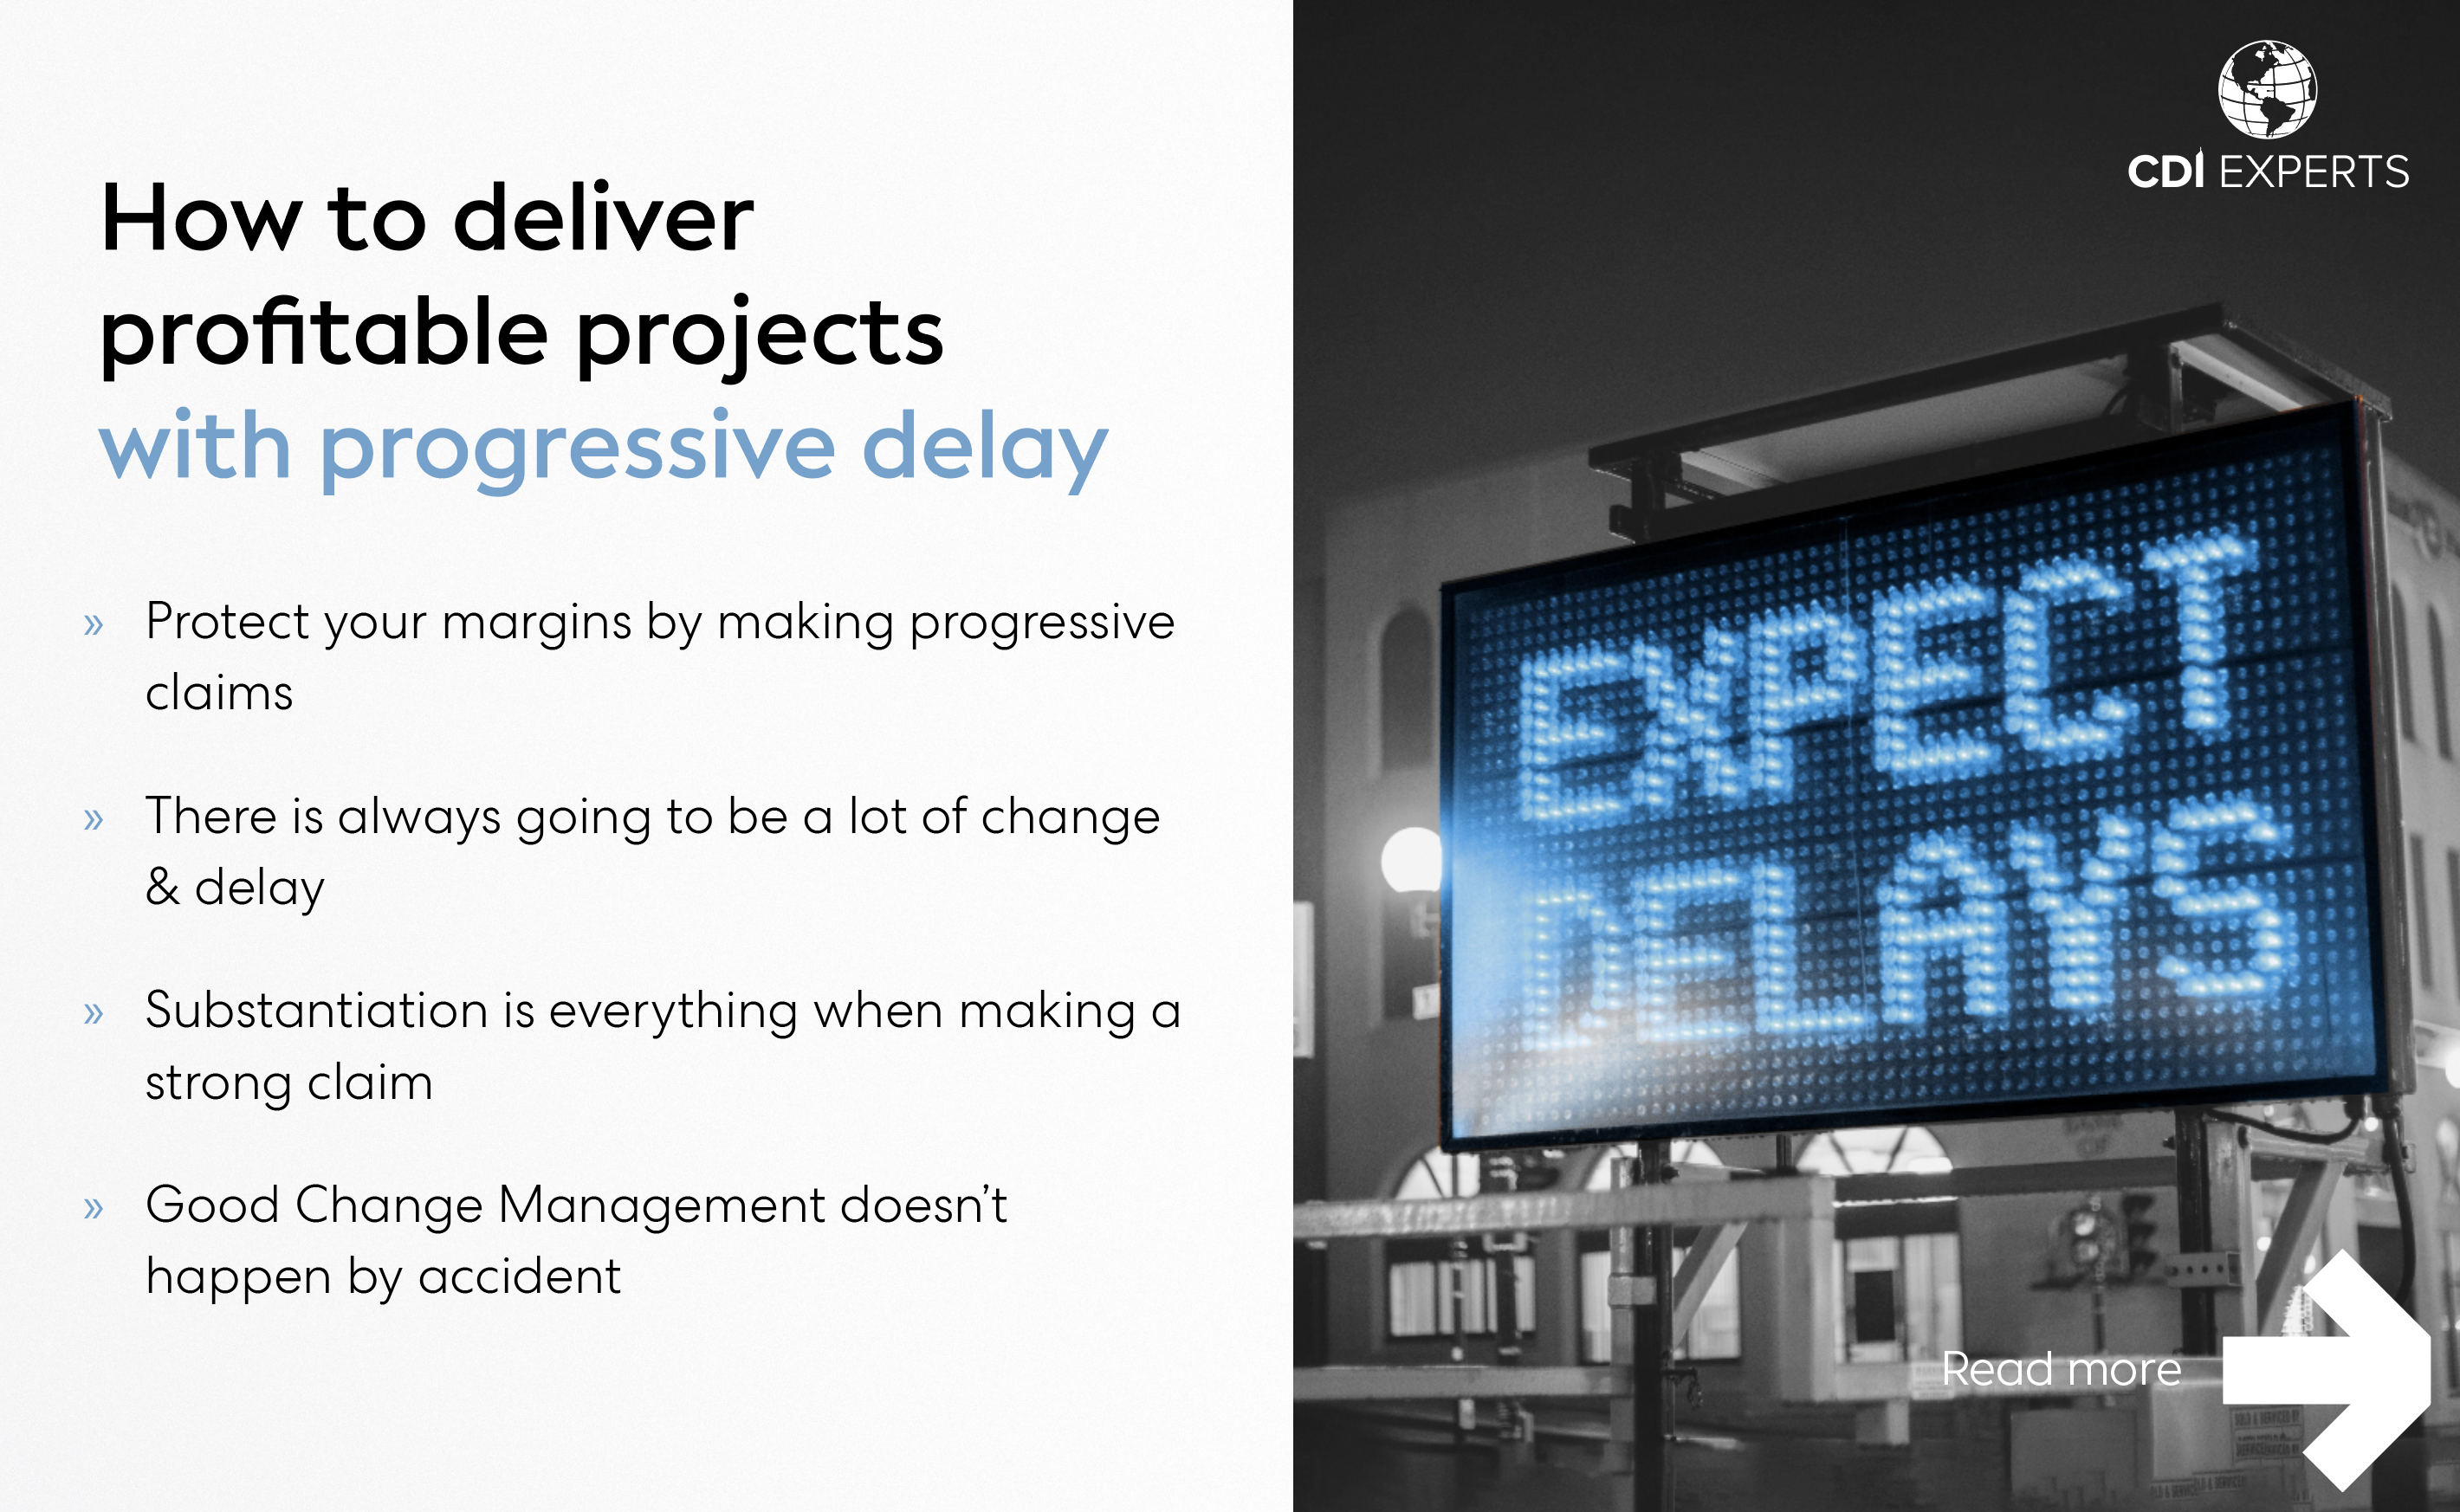 How to deliver profitable projects with progressive delay